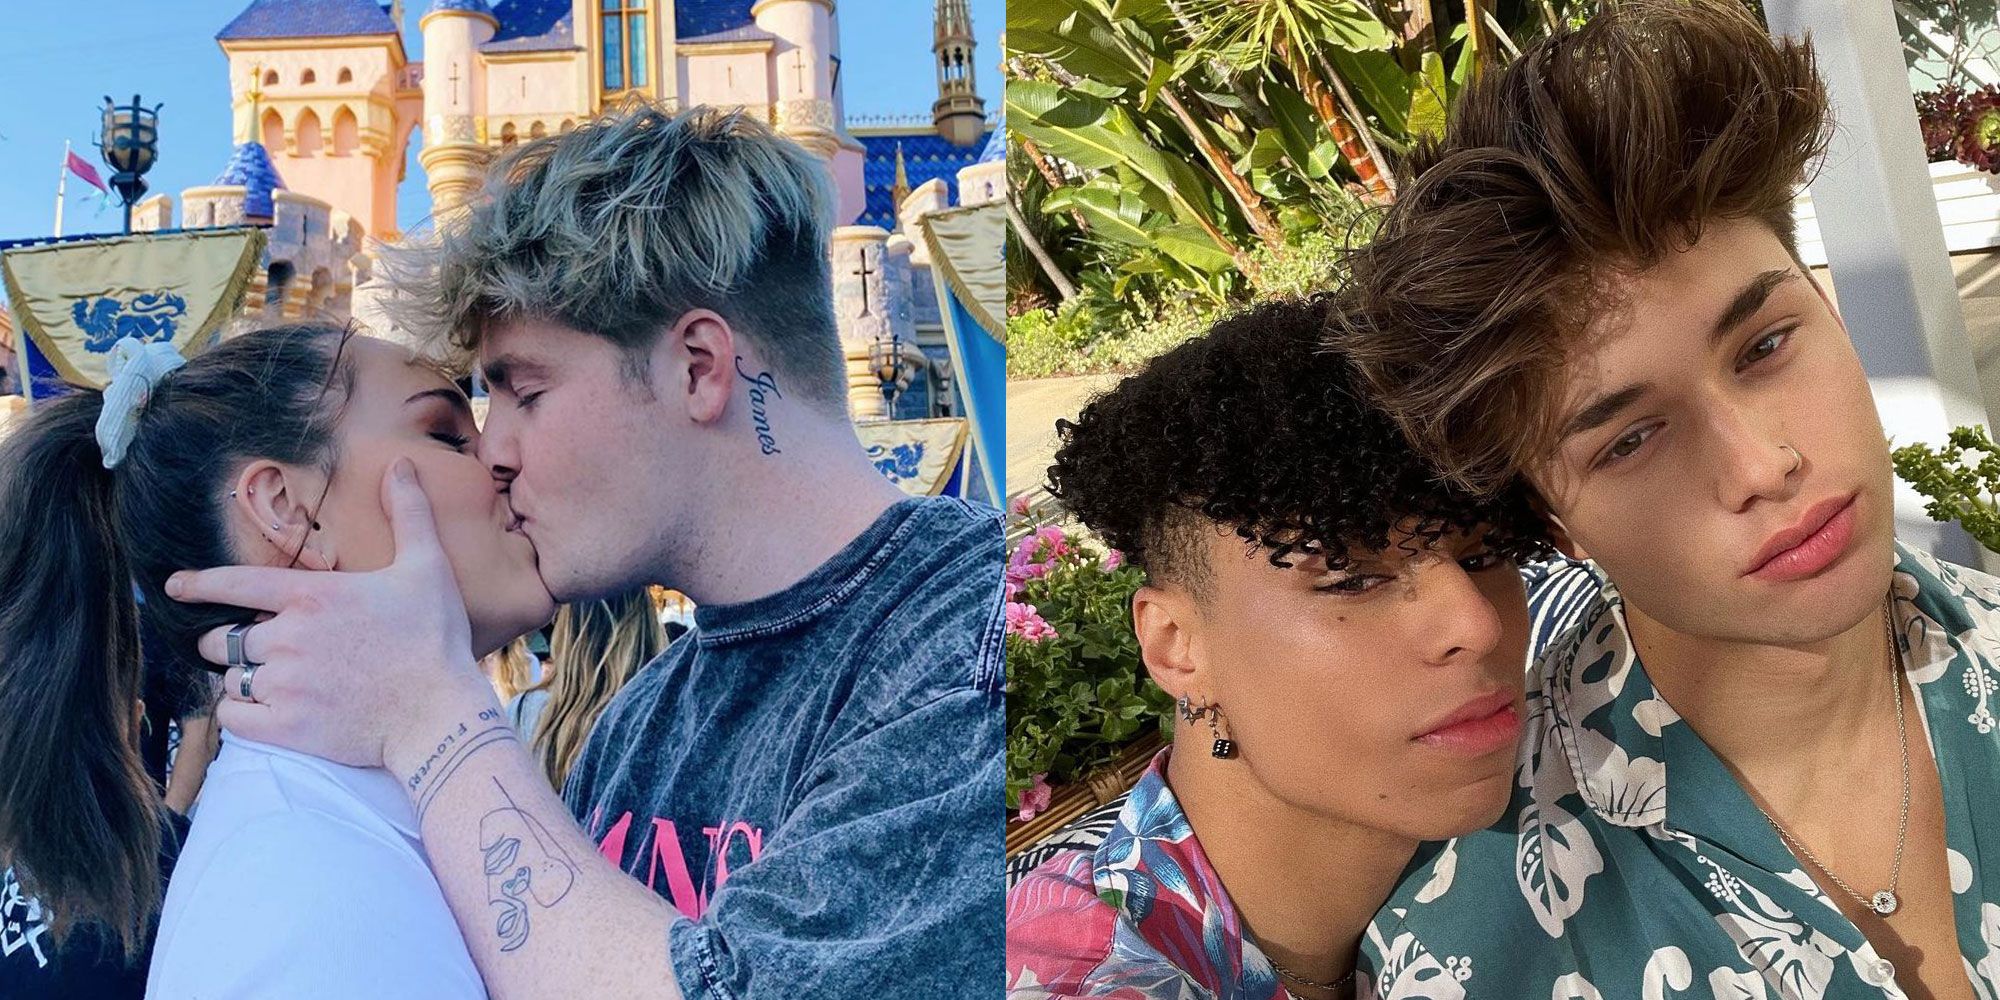 Who is vinnie from the hype house dating?